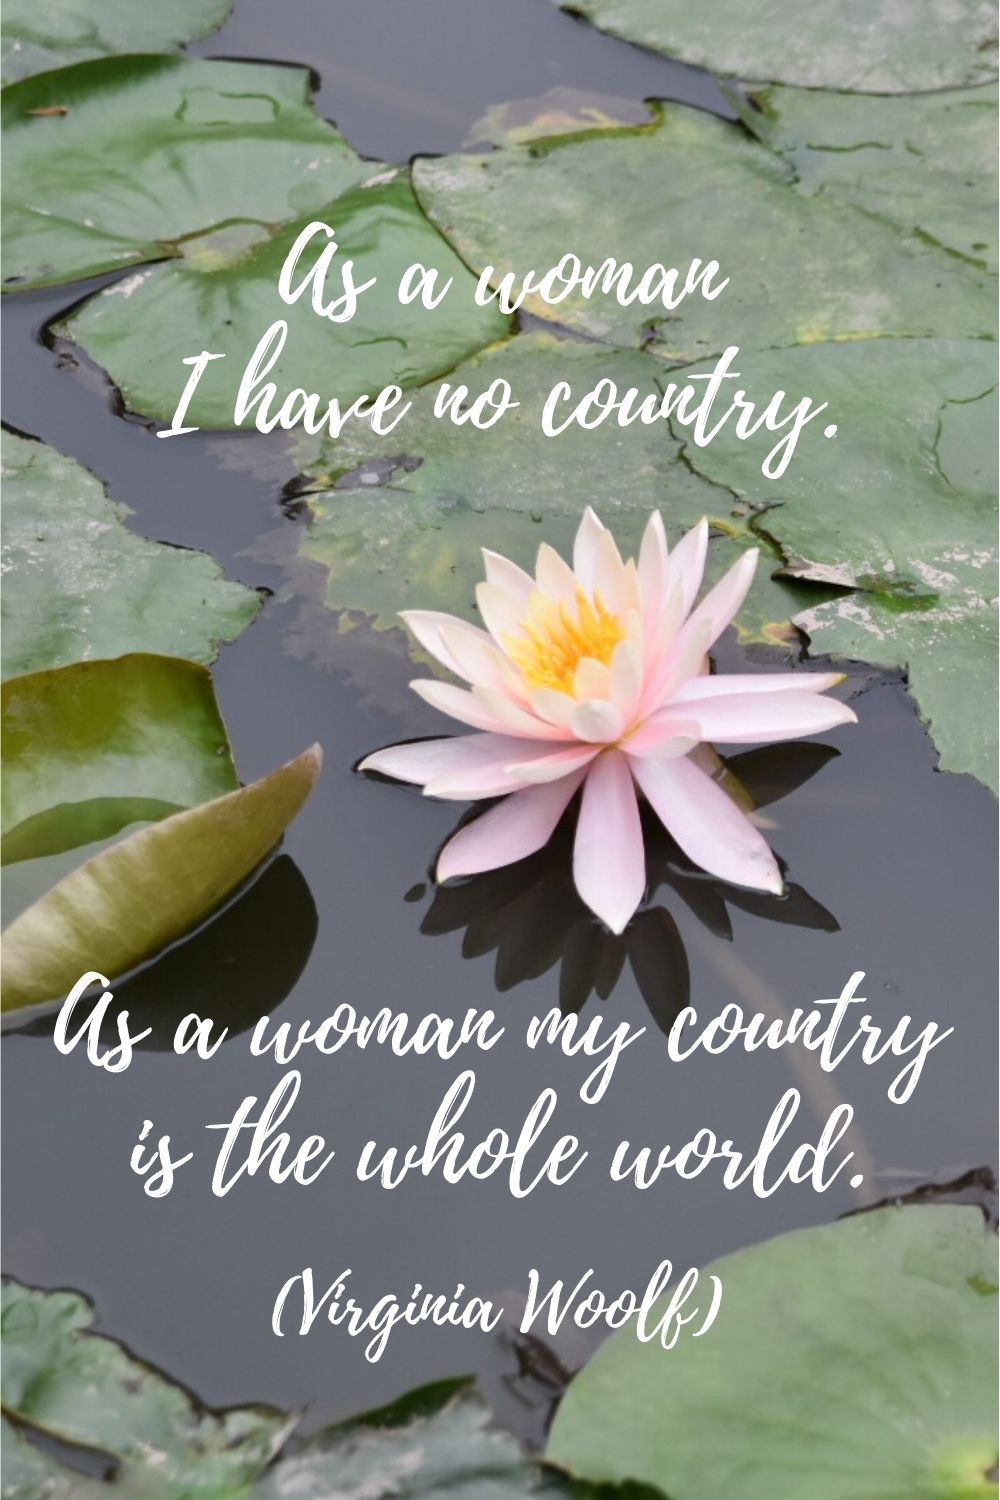 As a woman, I have no country. As a woman, my country is the whole world. Quotes by Virginia Woolf